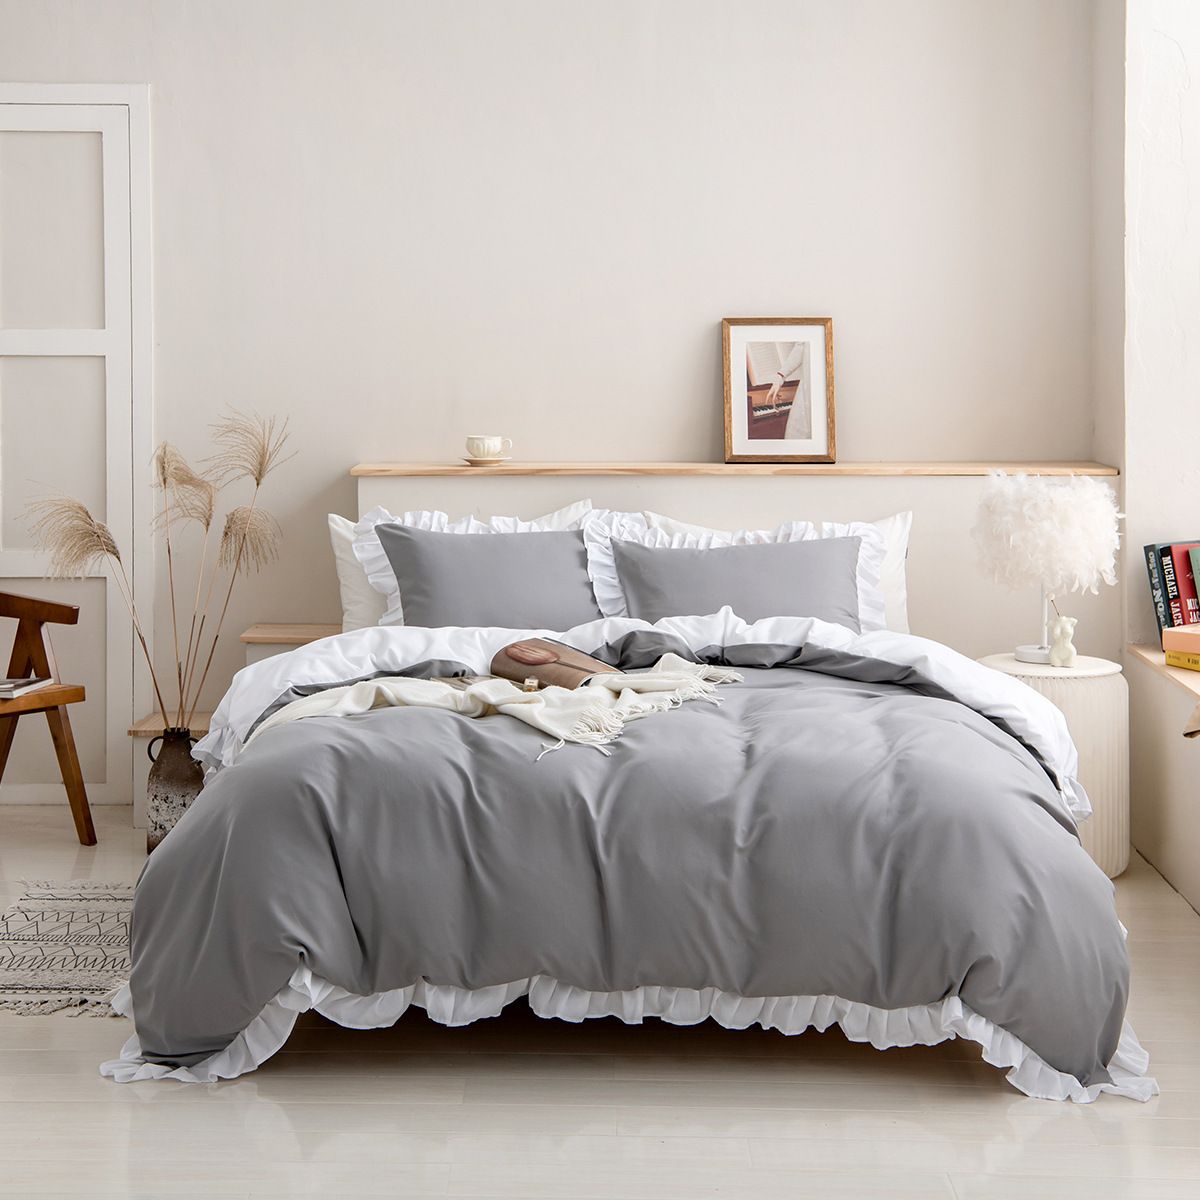 2/3pcs Soft and Comfortable Solid Color Bedding Set,including Duvet Cover and Pillowcases